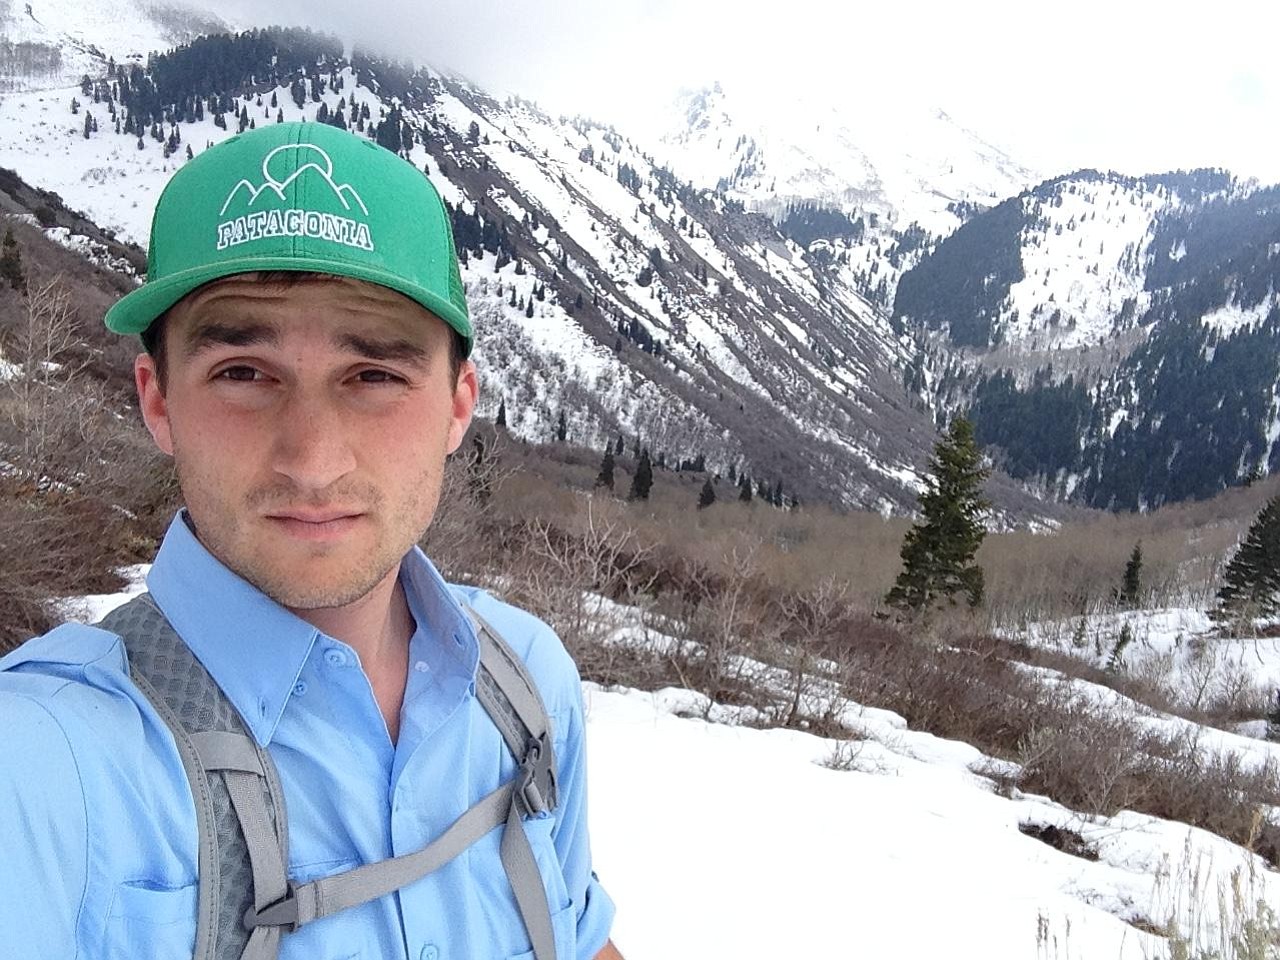 Morgen Glessing will spend his summer on the Pacific Crest National Scenic Trail, hiking from Canada to Mexico.